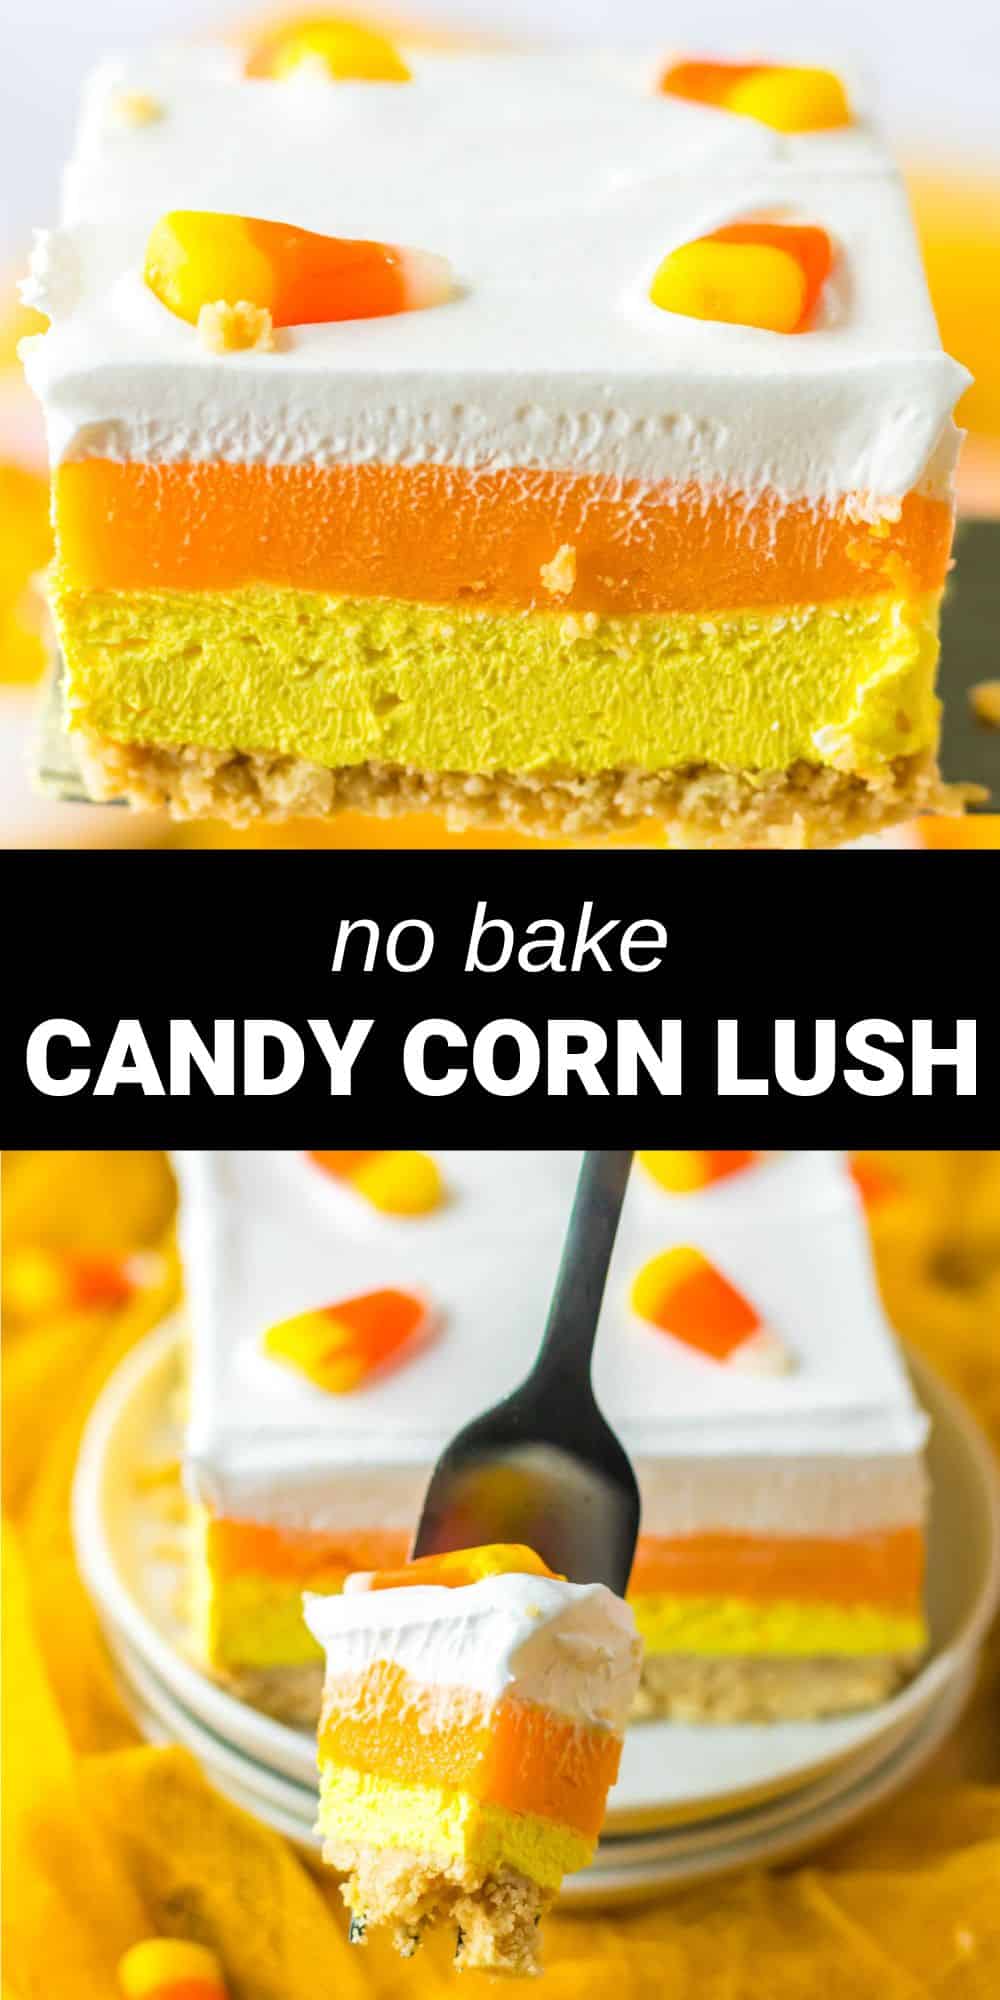 This candy corn lush is a rich and creamy layered dessert that’s perfect for parties. And with its pretty candy corn-colored layers, it’s a treat that will fit in perfectly at any Halloween celebration!